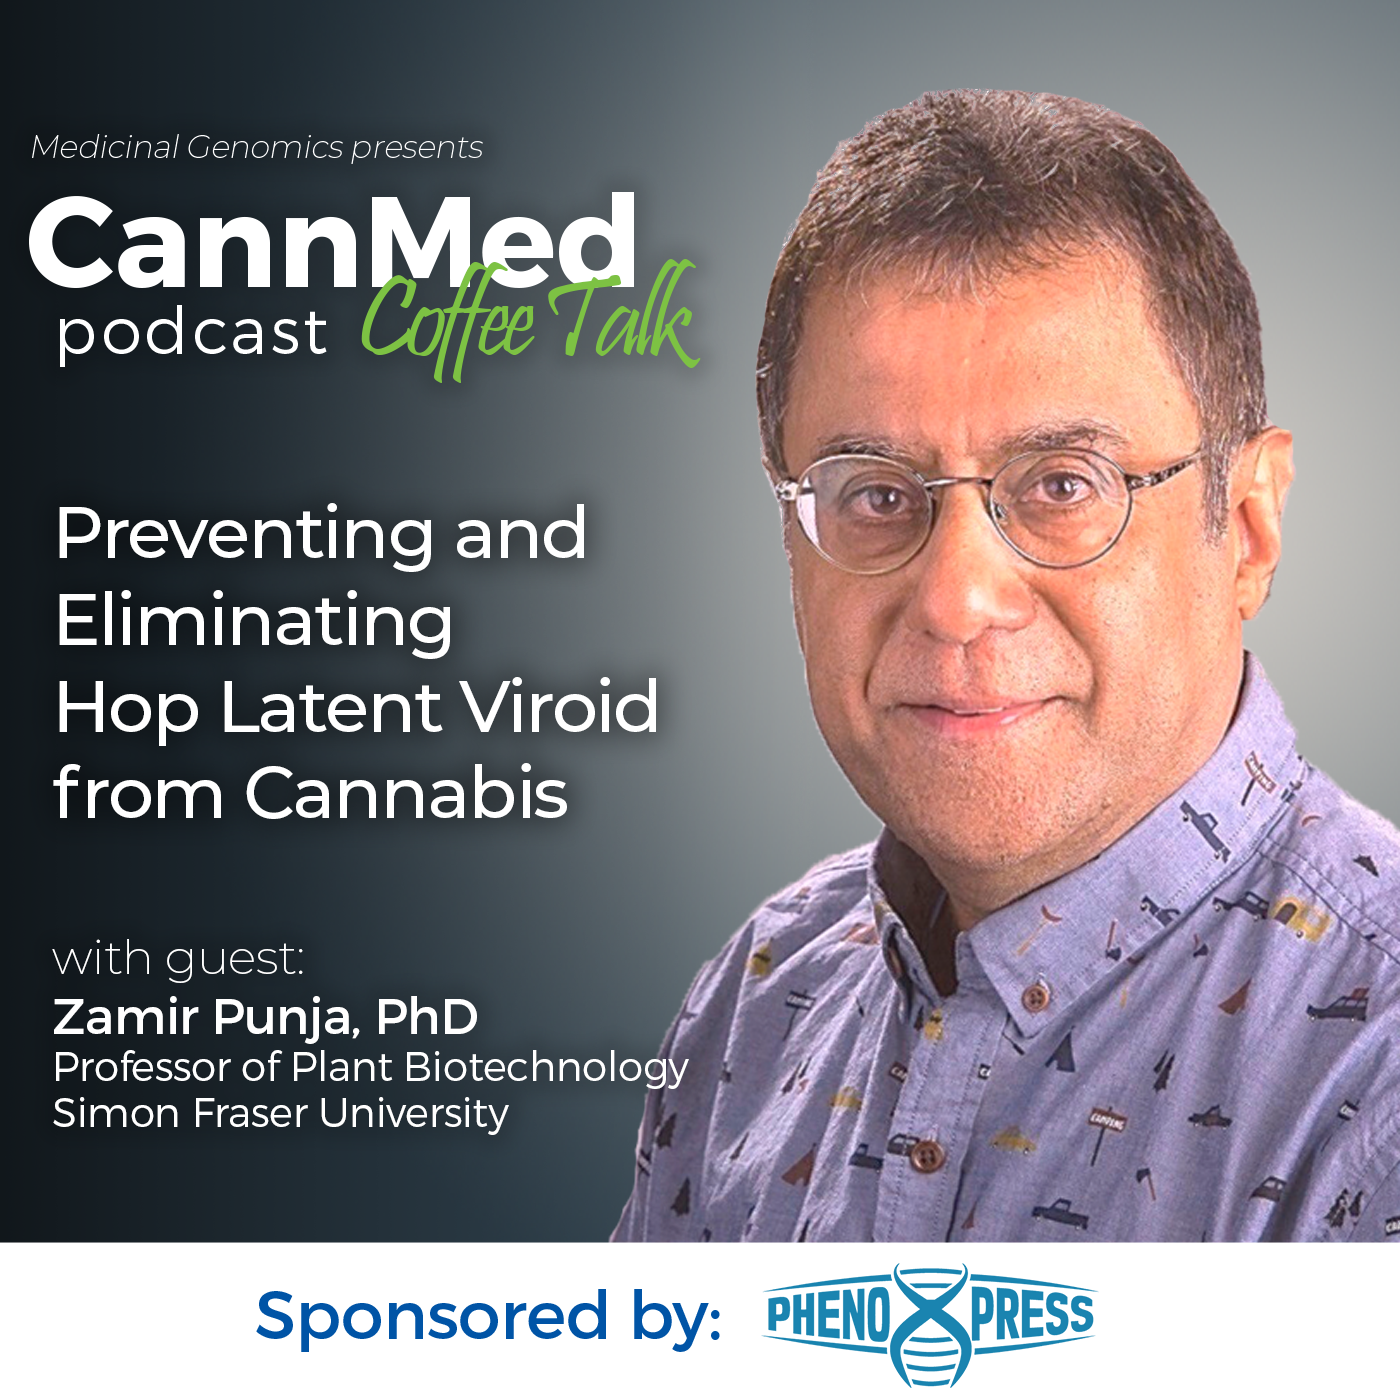 Featured image for “Preventing and Eliminating Hop Latent Viroid from Cannabis with Zamir Punja, PhD”